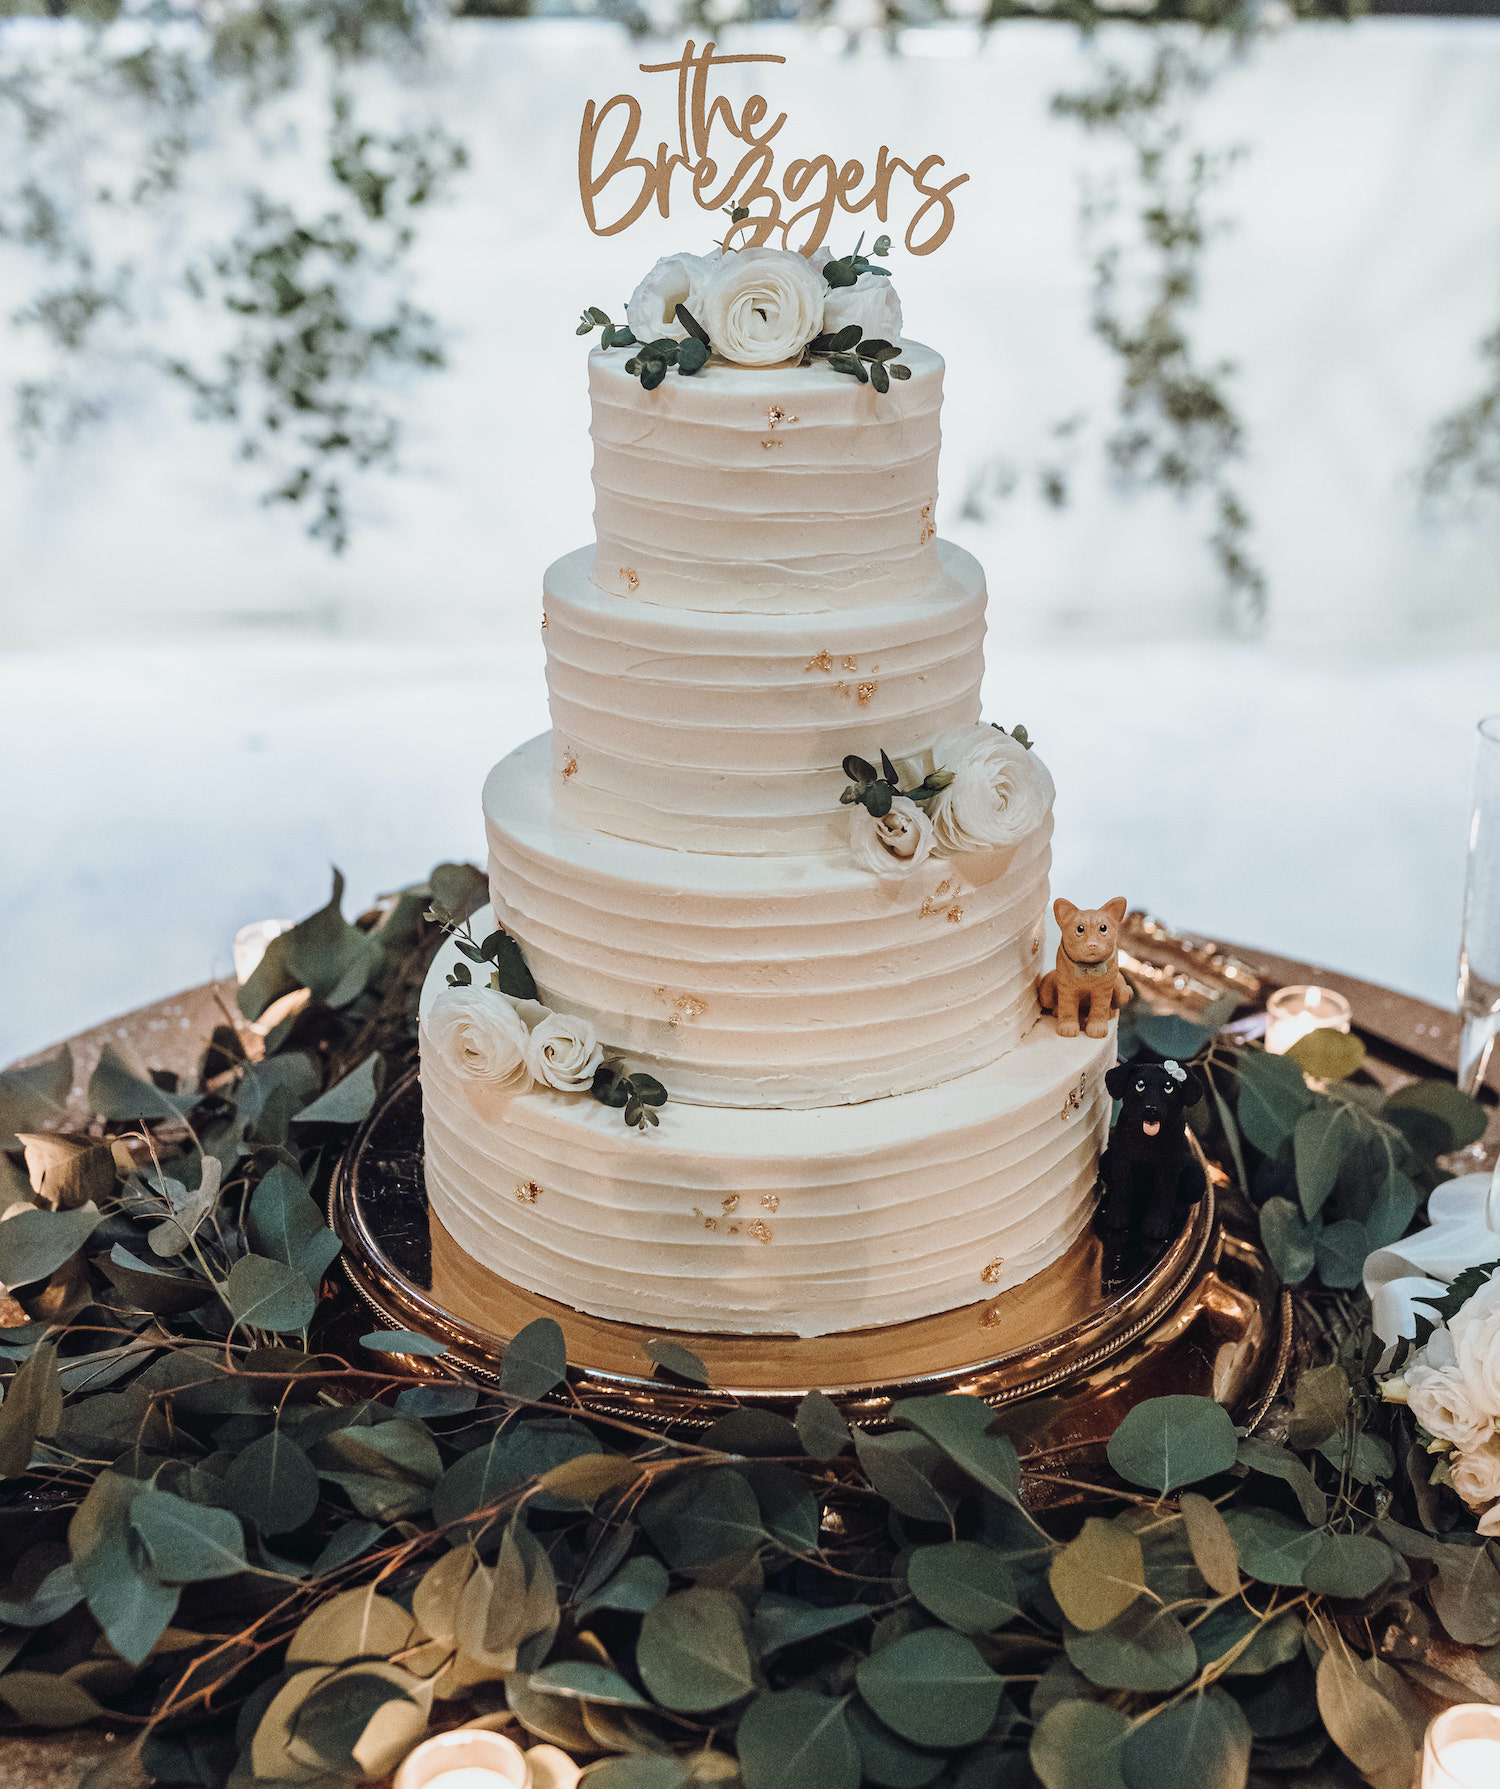 A four tiered white wedding cake sits in the center of eucalyptus leaves and has white Ranunculus flowers on it.